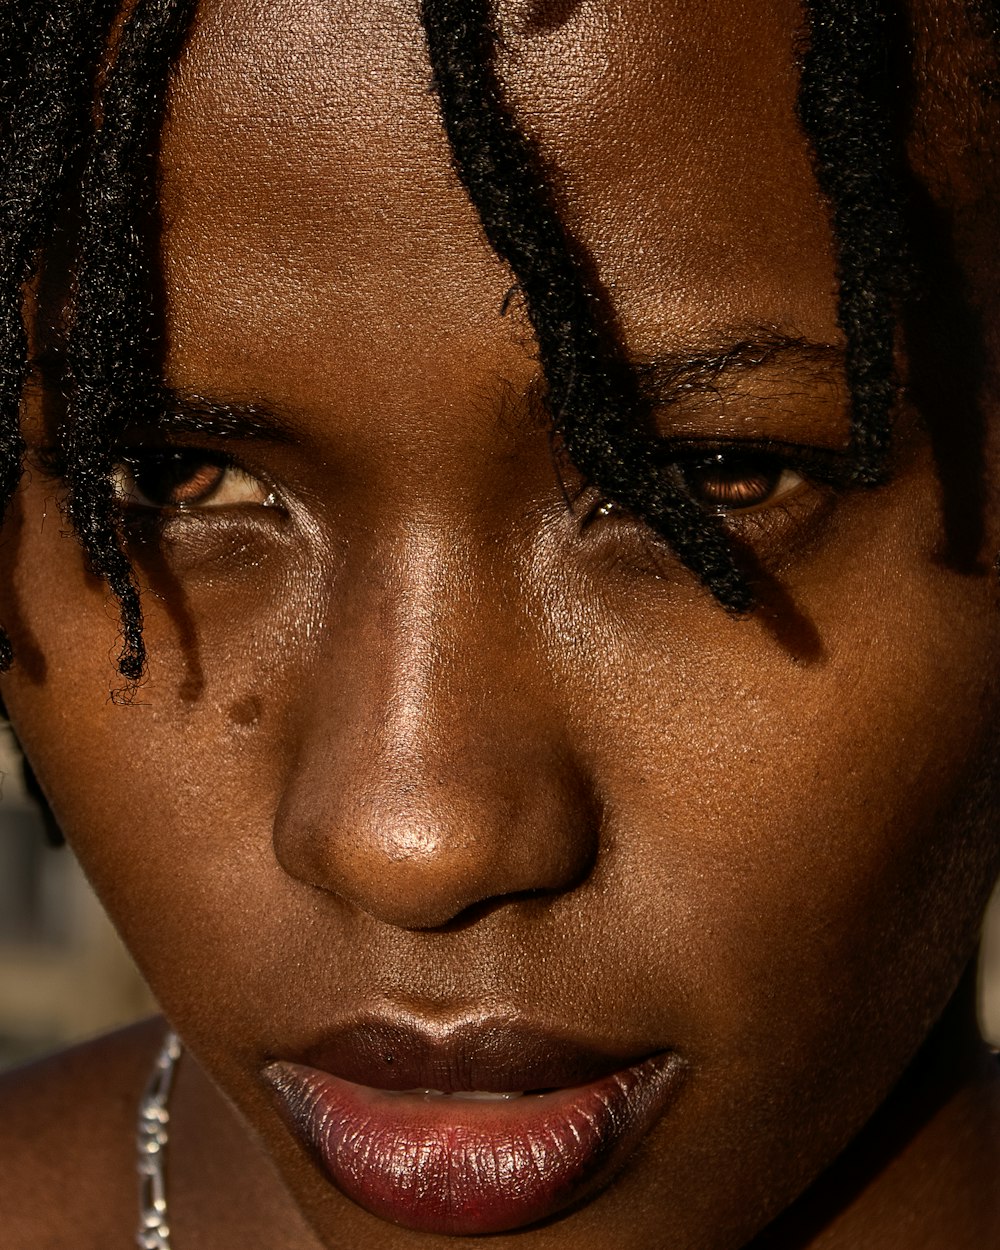 a close up of a woman with dreadlocks